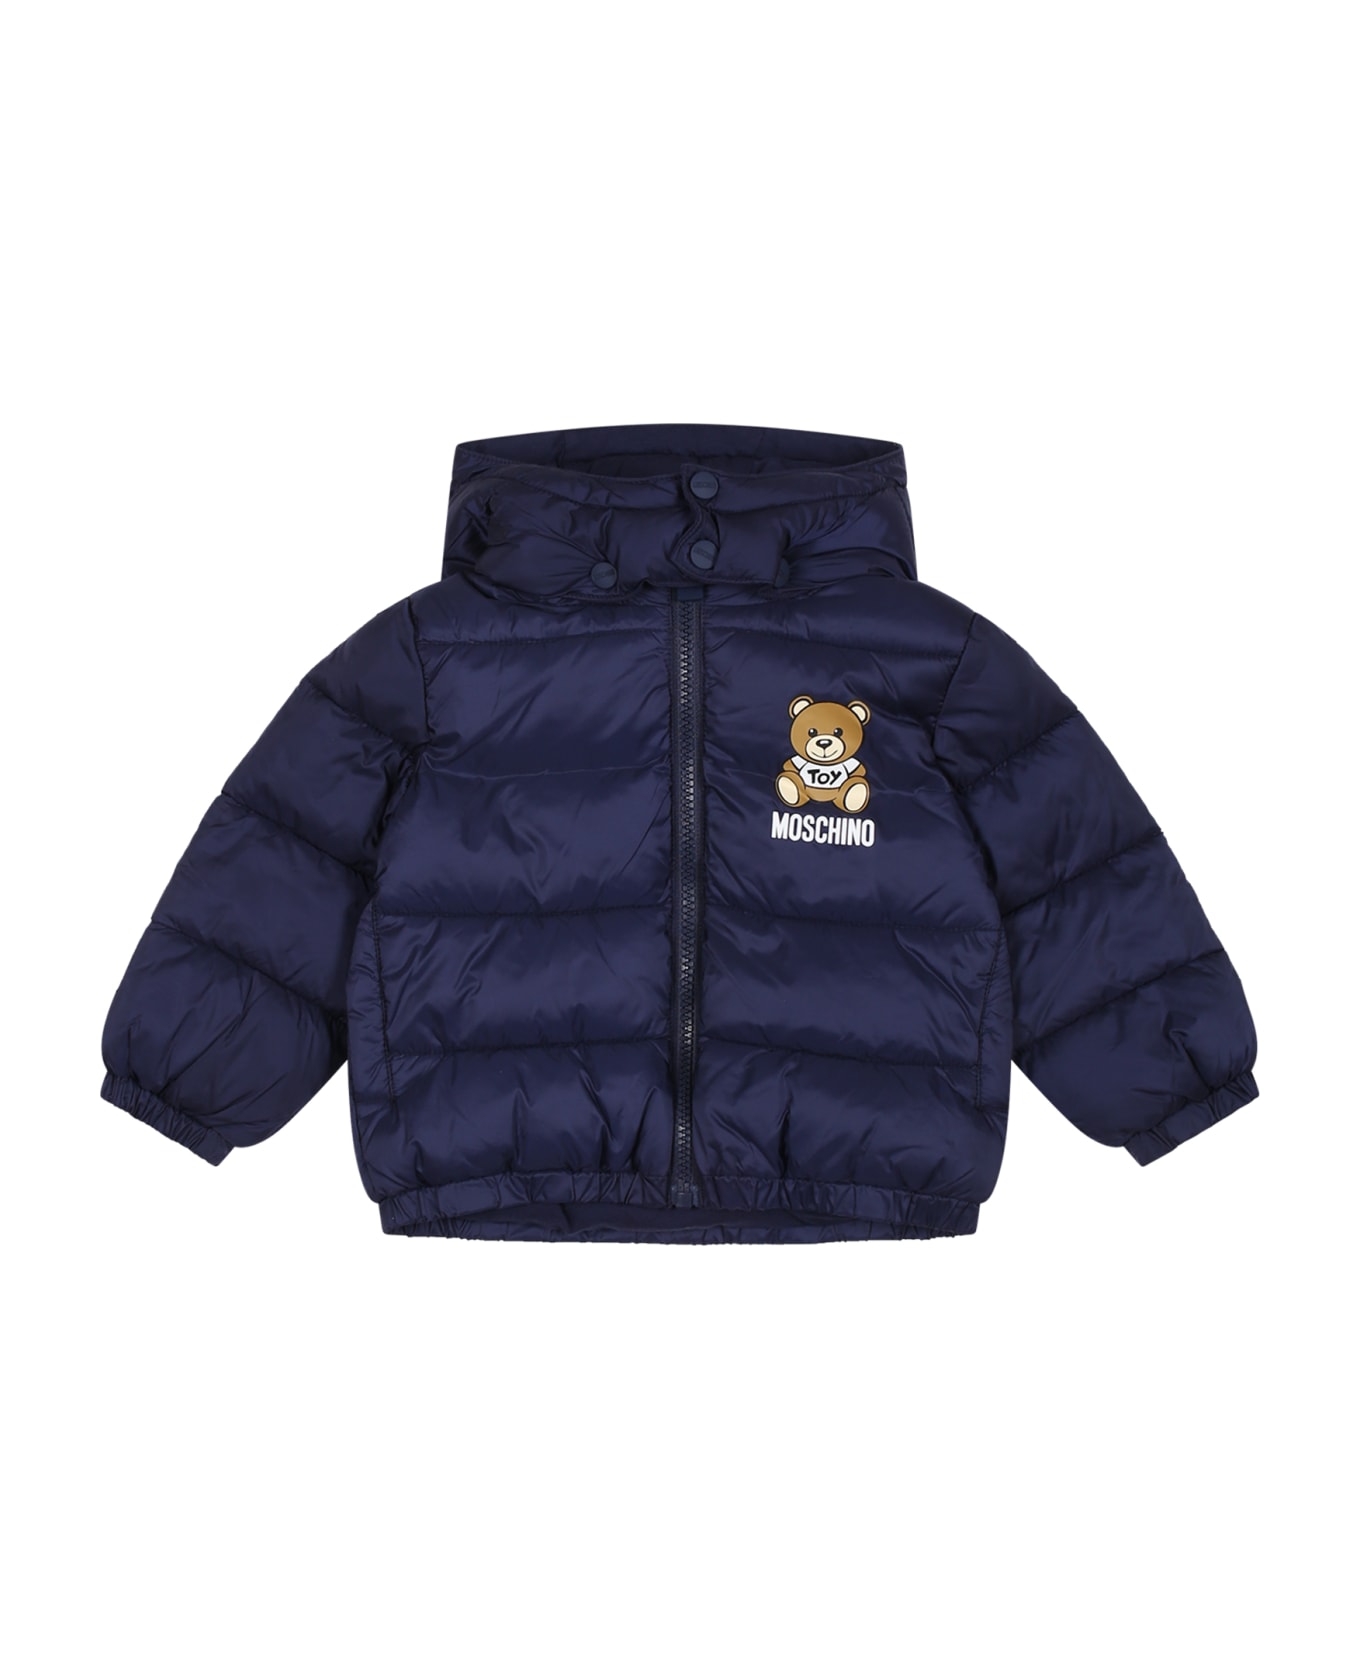 Moschino Blue Jacket For Baby Boy With Teddy Bear And Logo - Blue